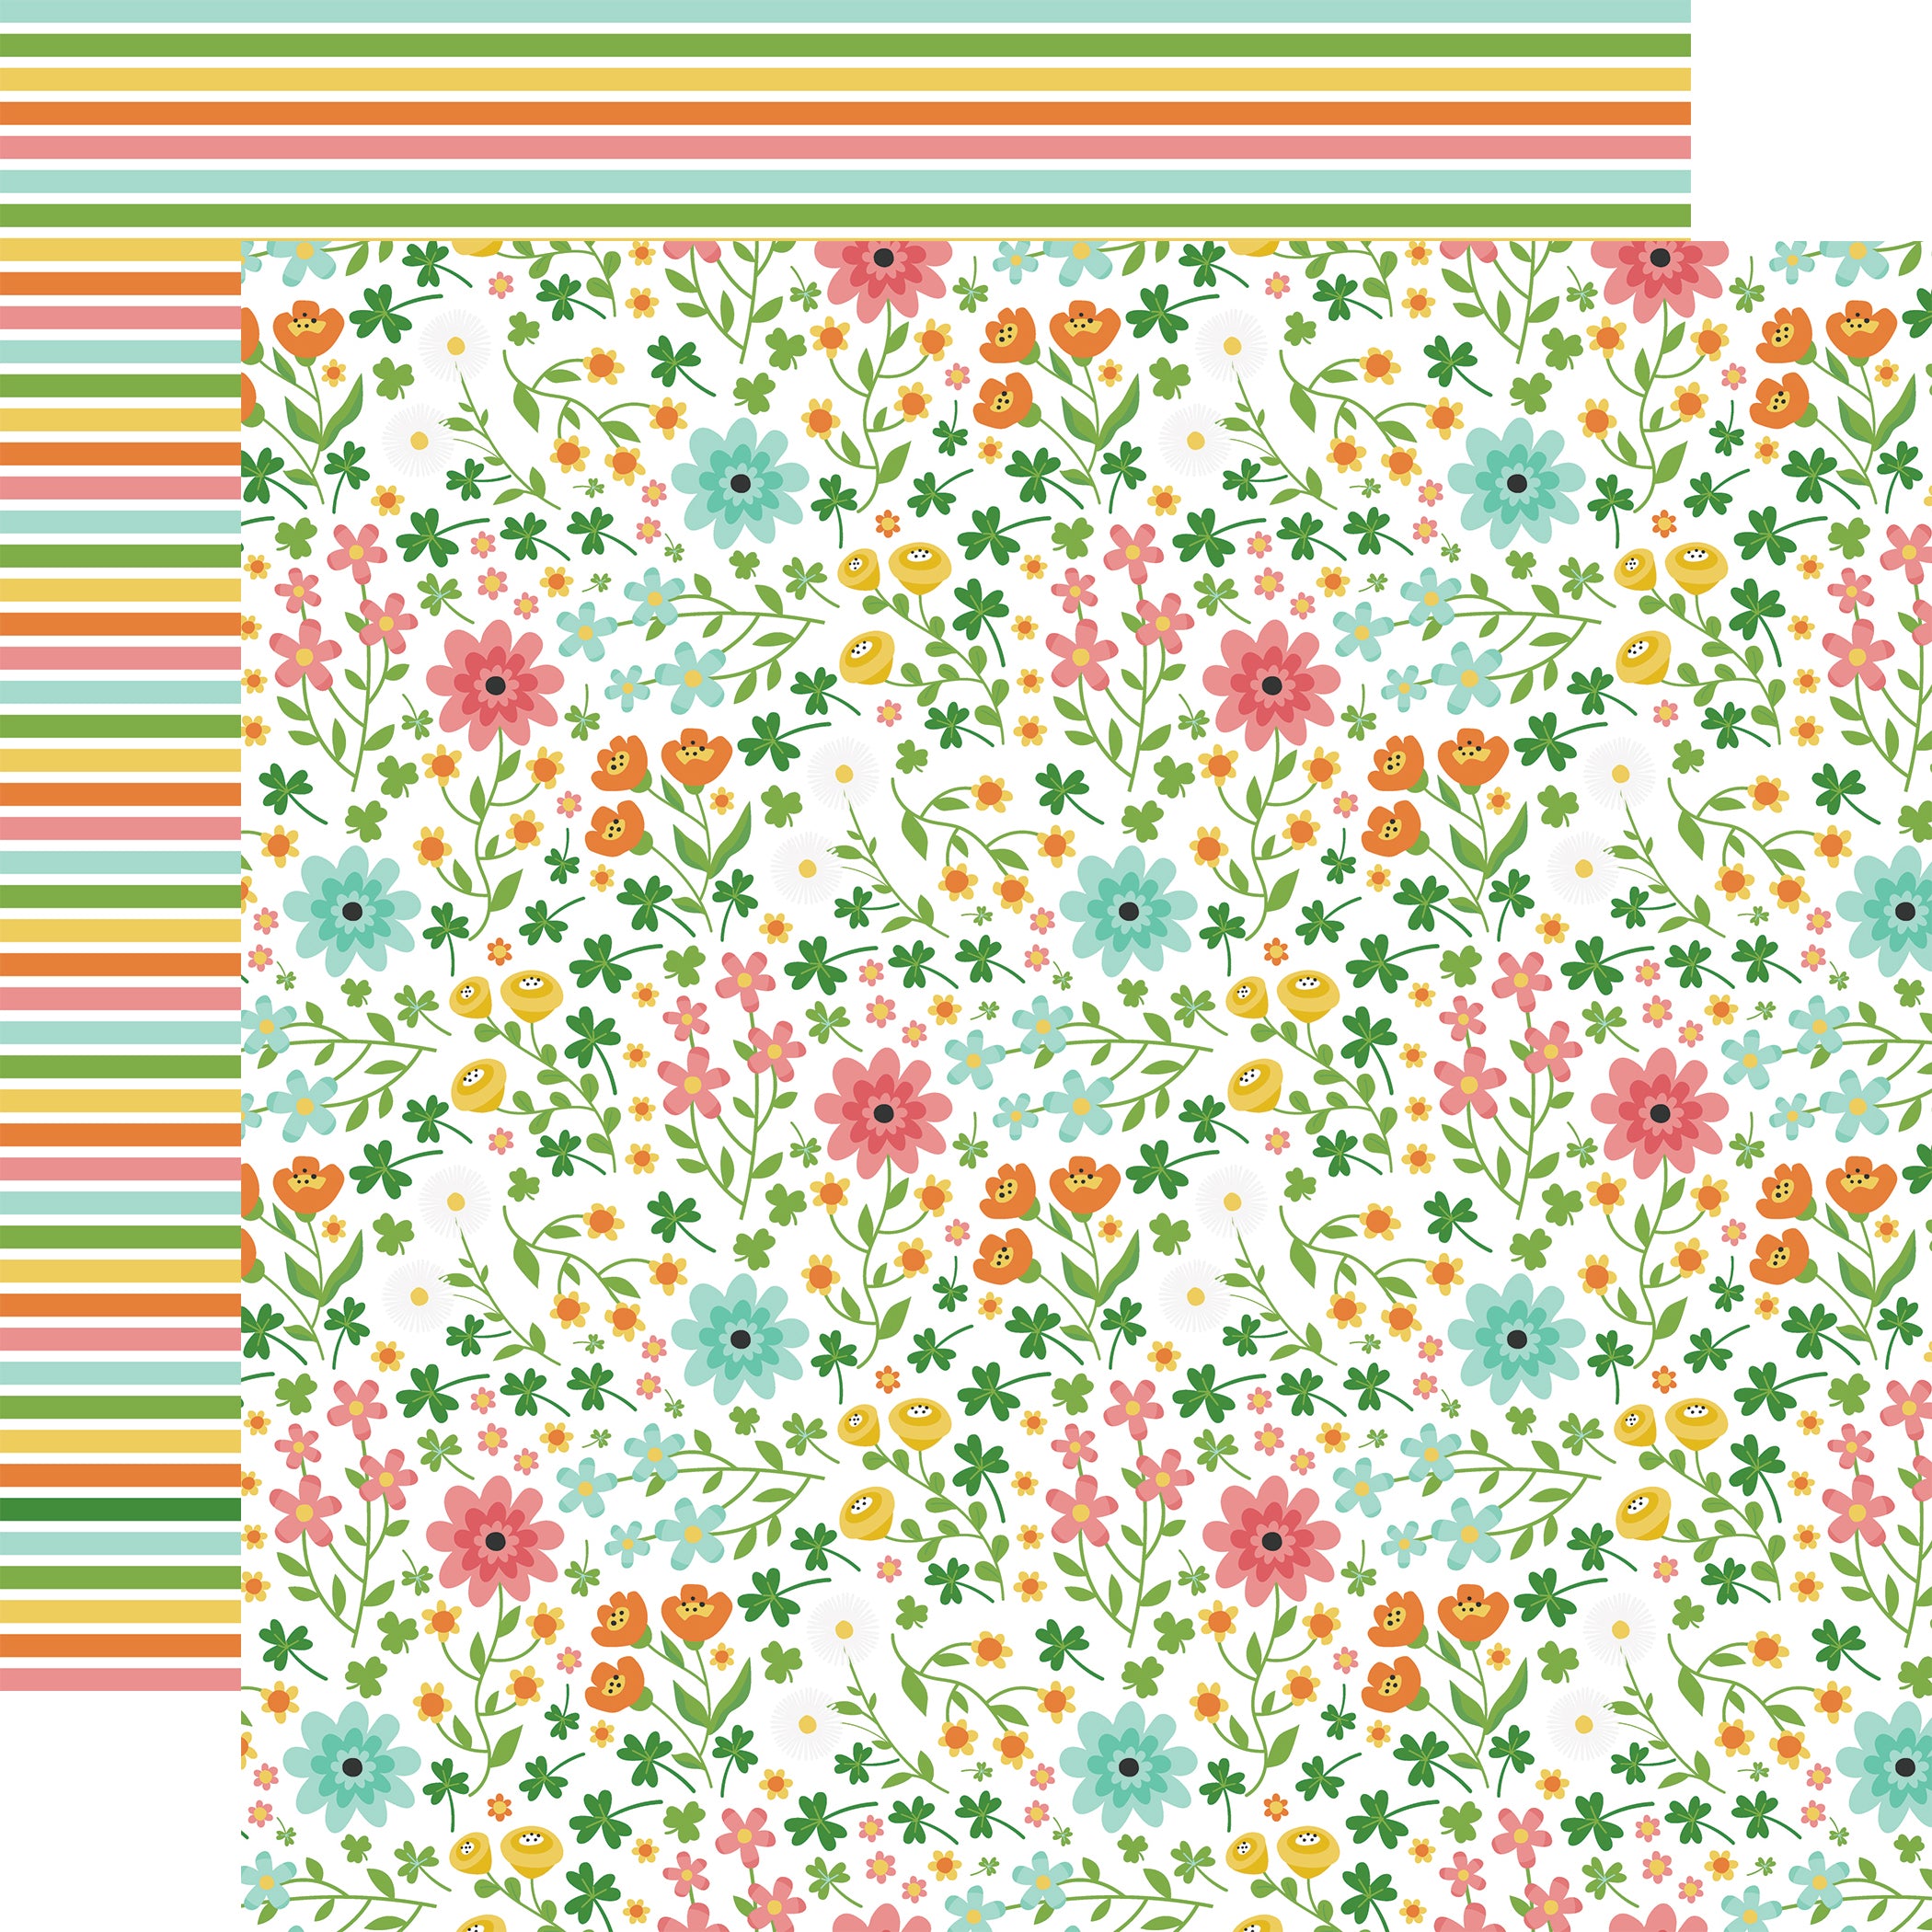 Happy St. Patrick's Day Collection March Blooms 12 x 12 Double-Sided Scrapbook Paper by Echo Park Paper